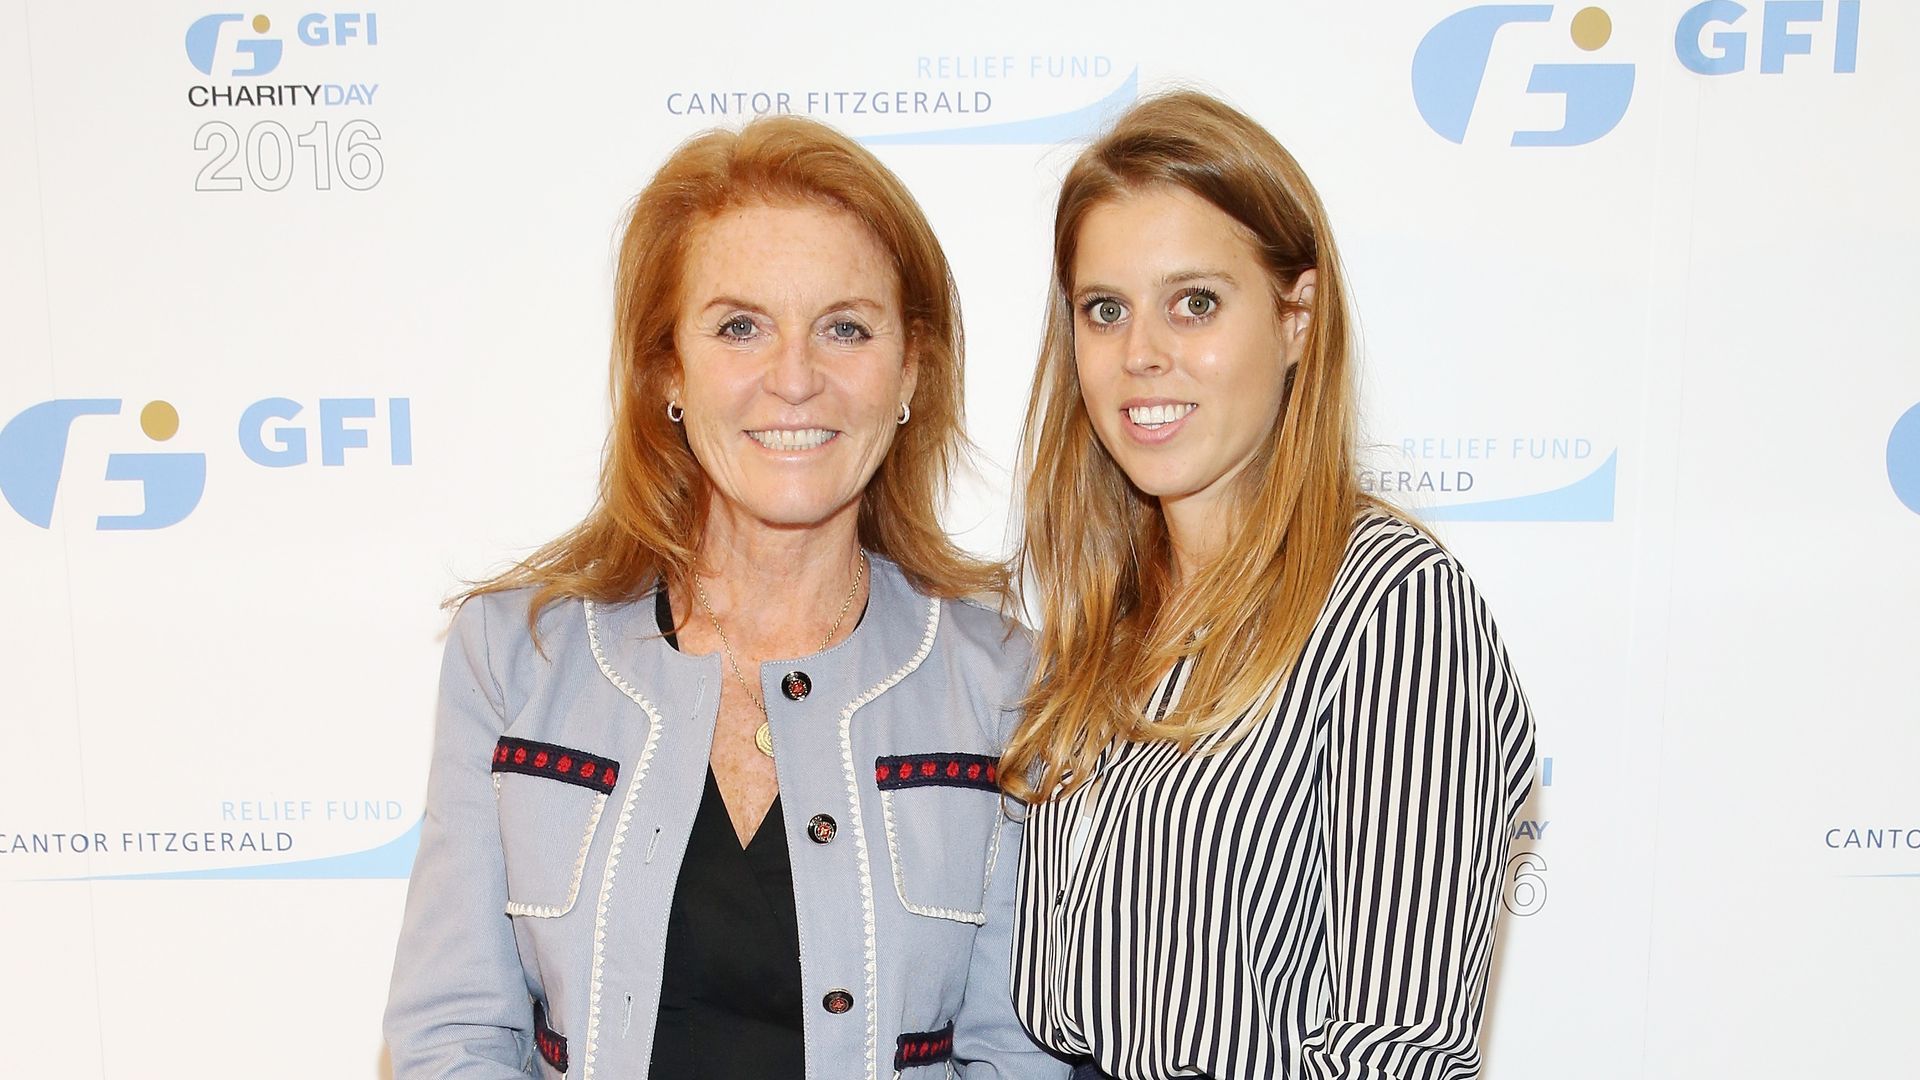 Sarah Ferguson and Princess Beatriceattend the Annual Charity Day hosted by Cantor Fitzgerald, 2016